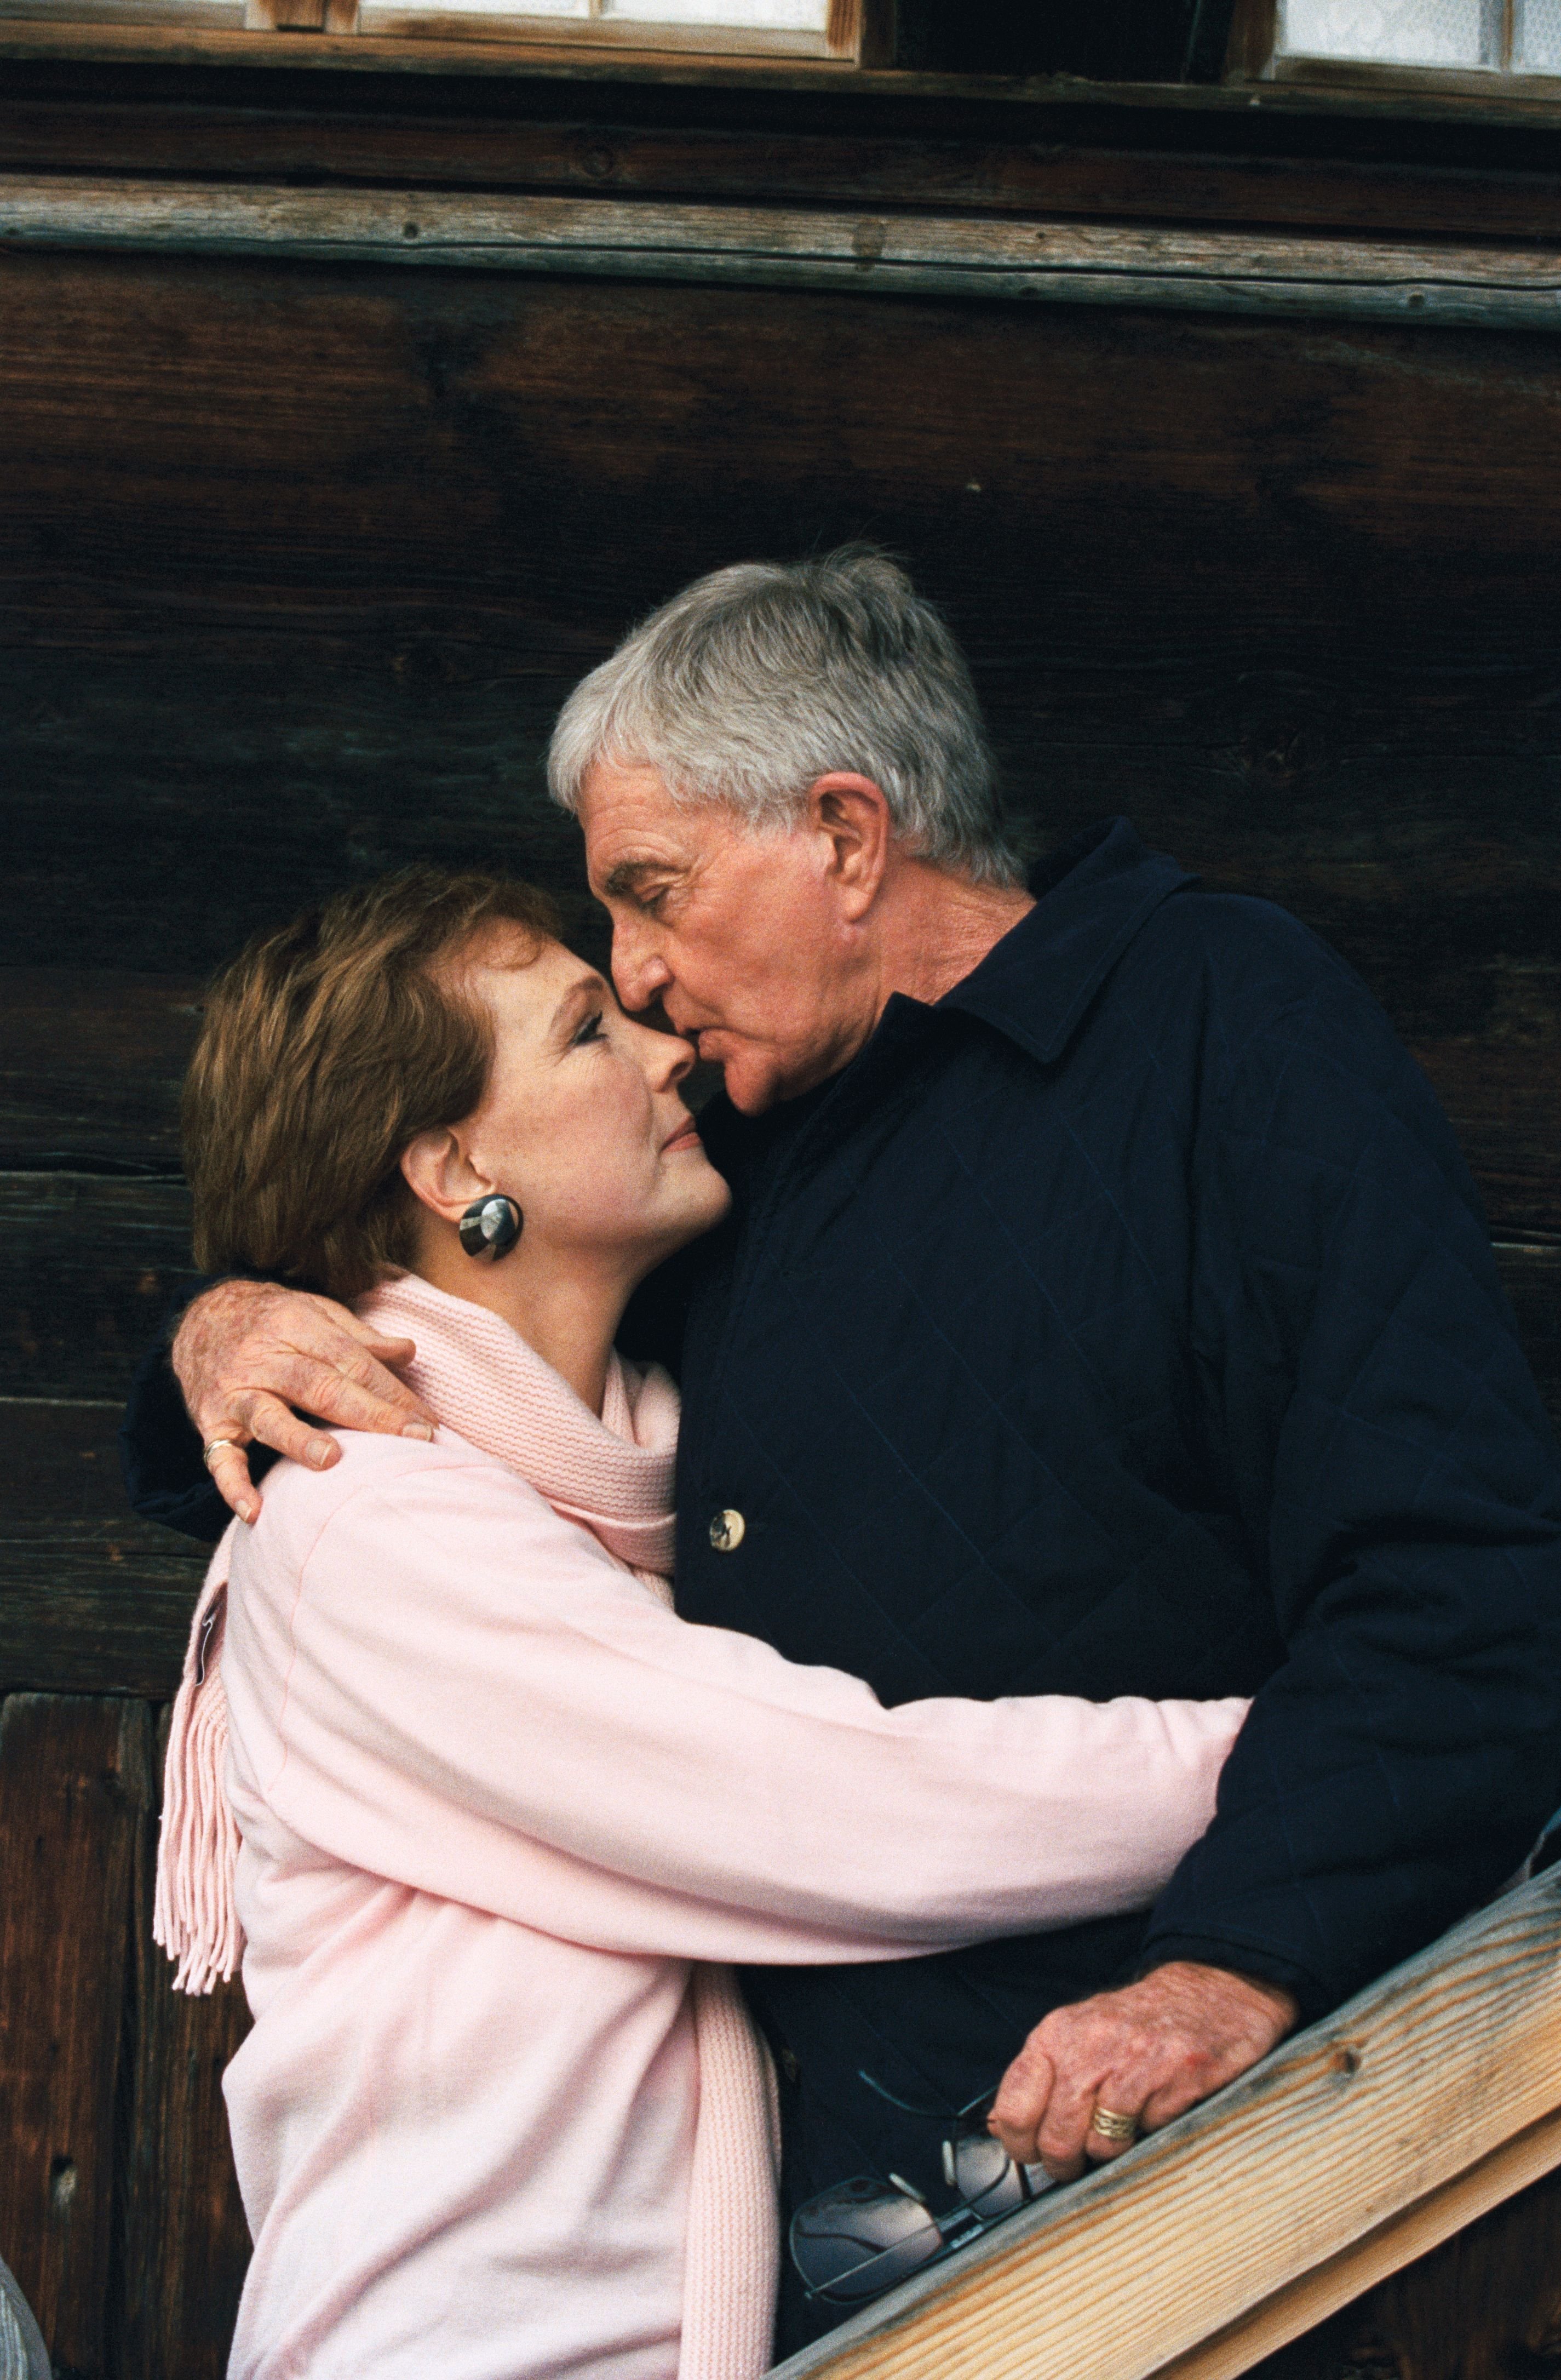 Julie Andrews and Blake Edwards embracing on December 31, 1993. | Source: Pascal Le Segretain/Sygma/Getty Images